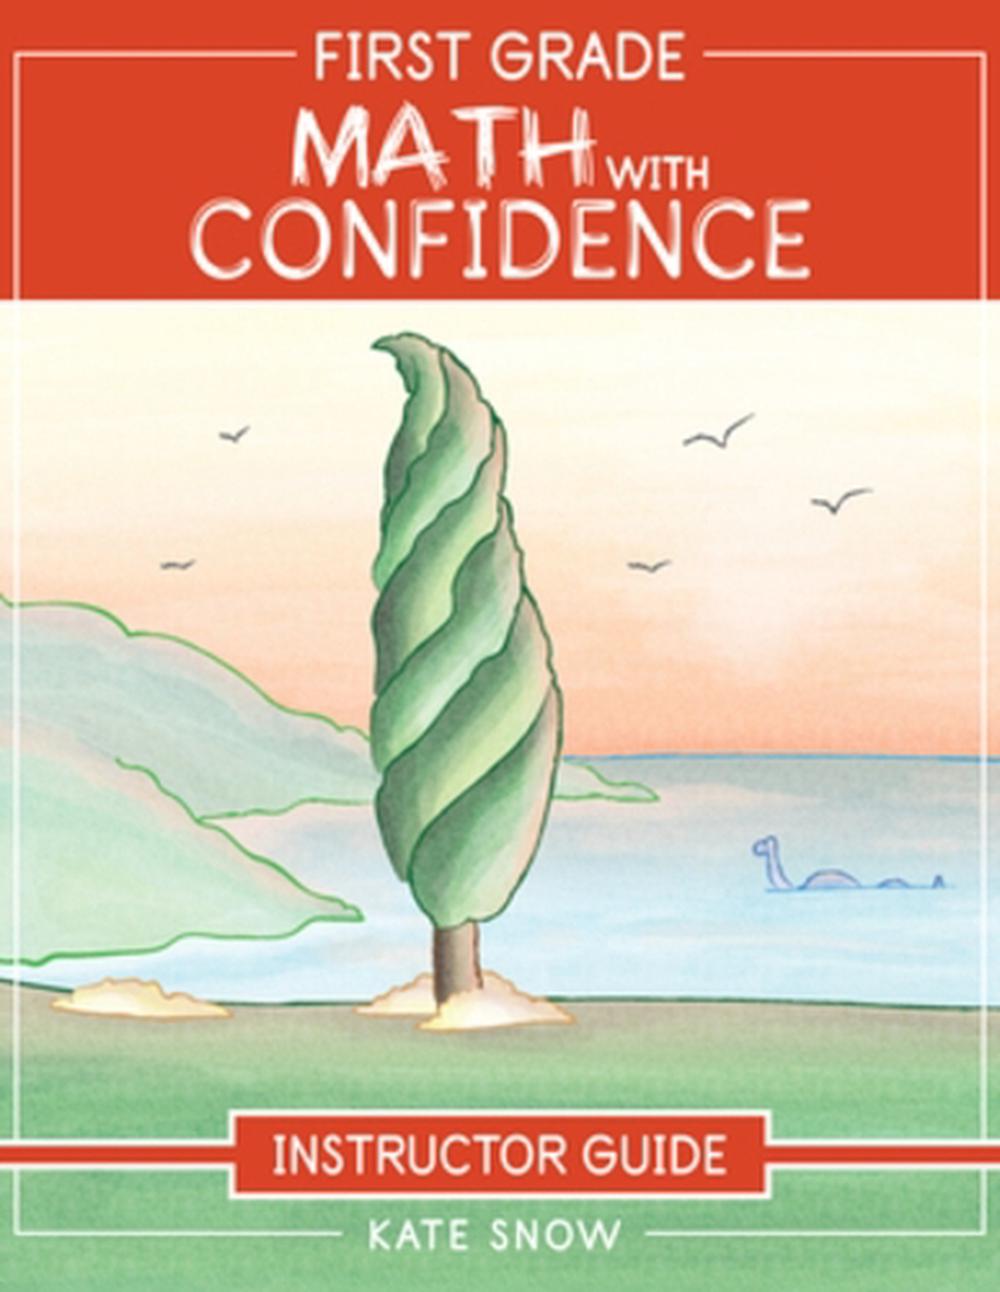 by　Confidence　Guide　9781952469053　Paperback,　online　Buy　First　Snow,　Kate　Math　Instructor　Grade　with　Nile　at　The